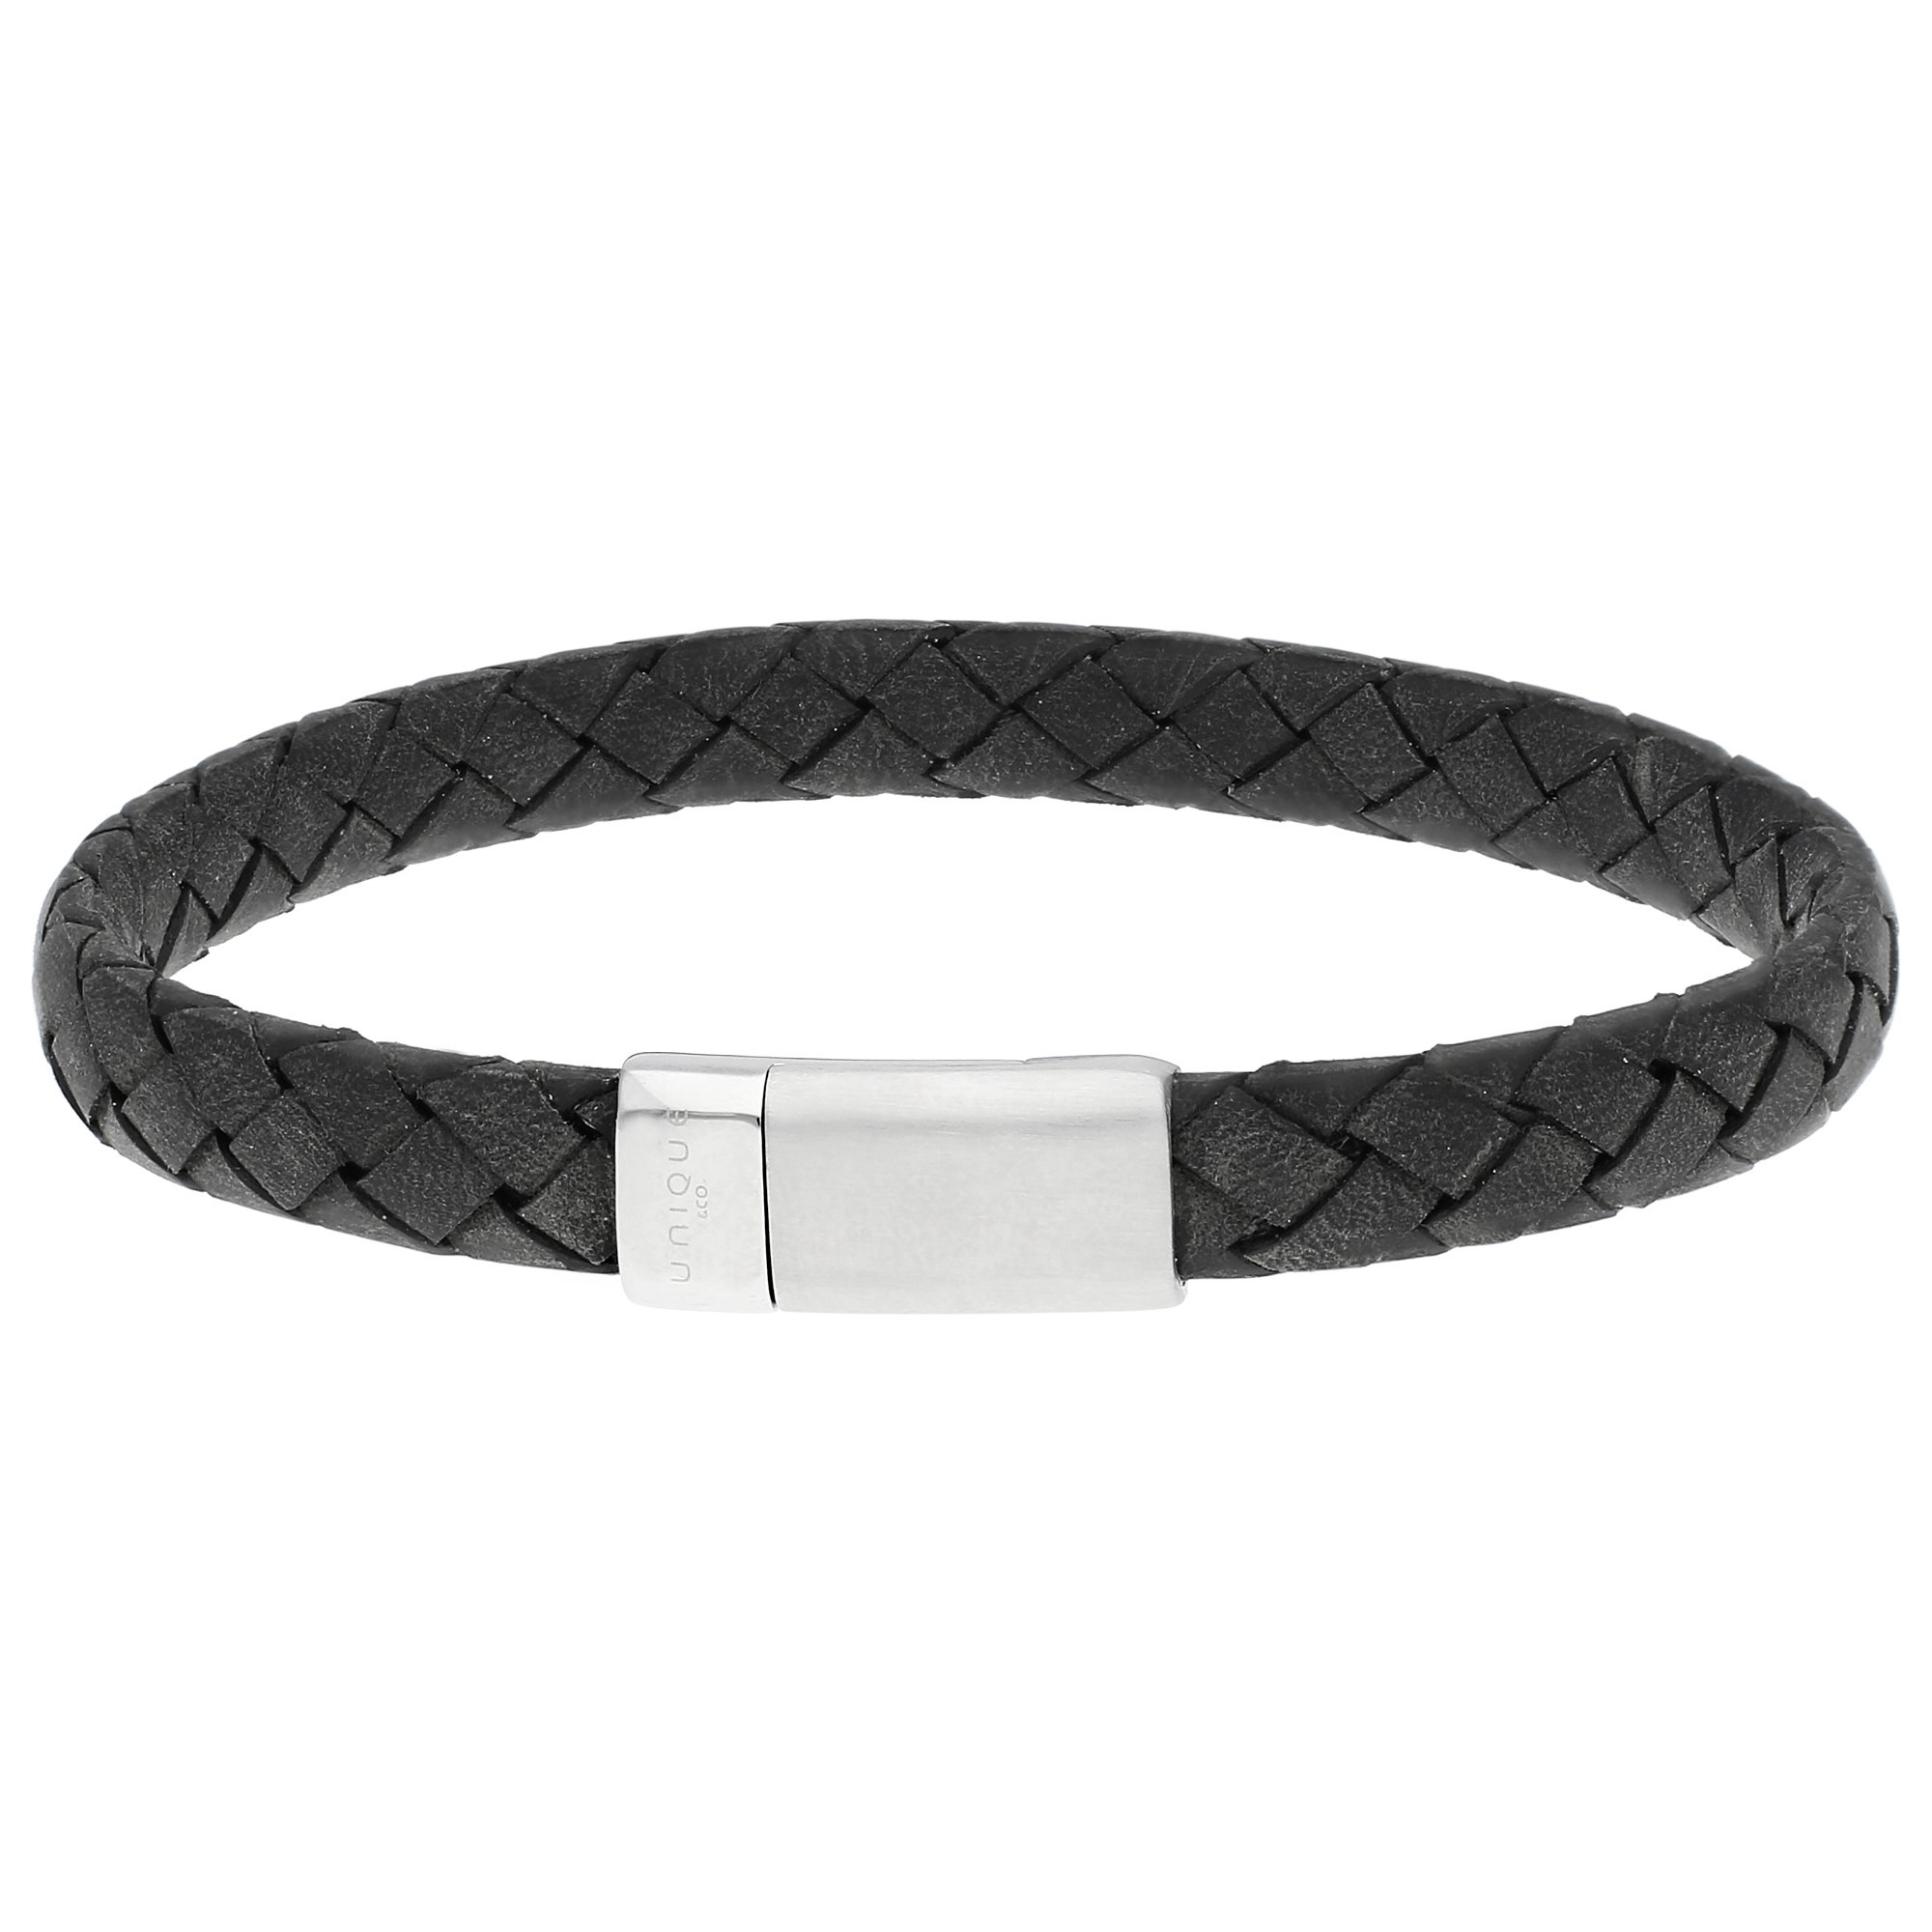 Men's Black Leather Bracelet With Steel Clasp | Buy Online | Free and ...